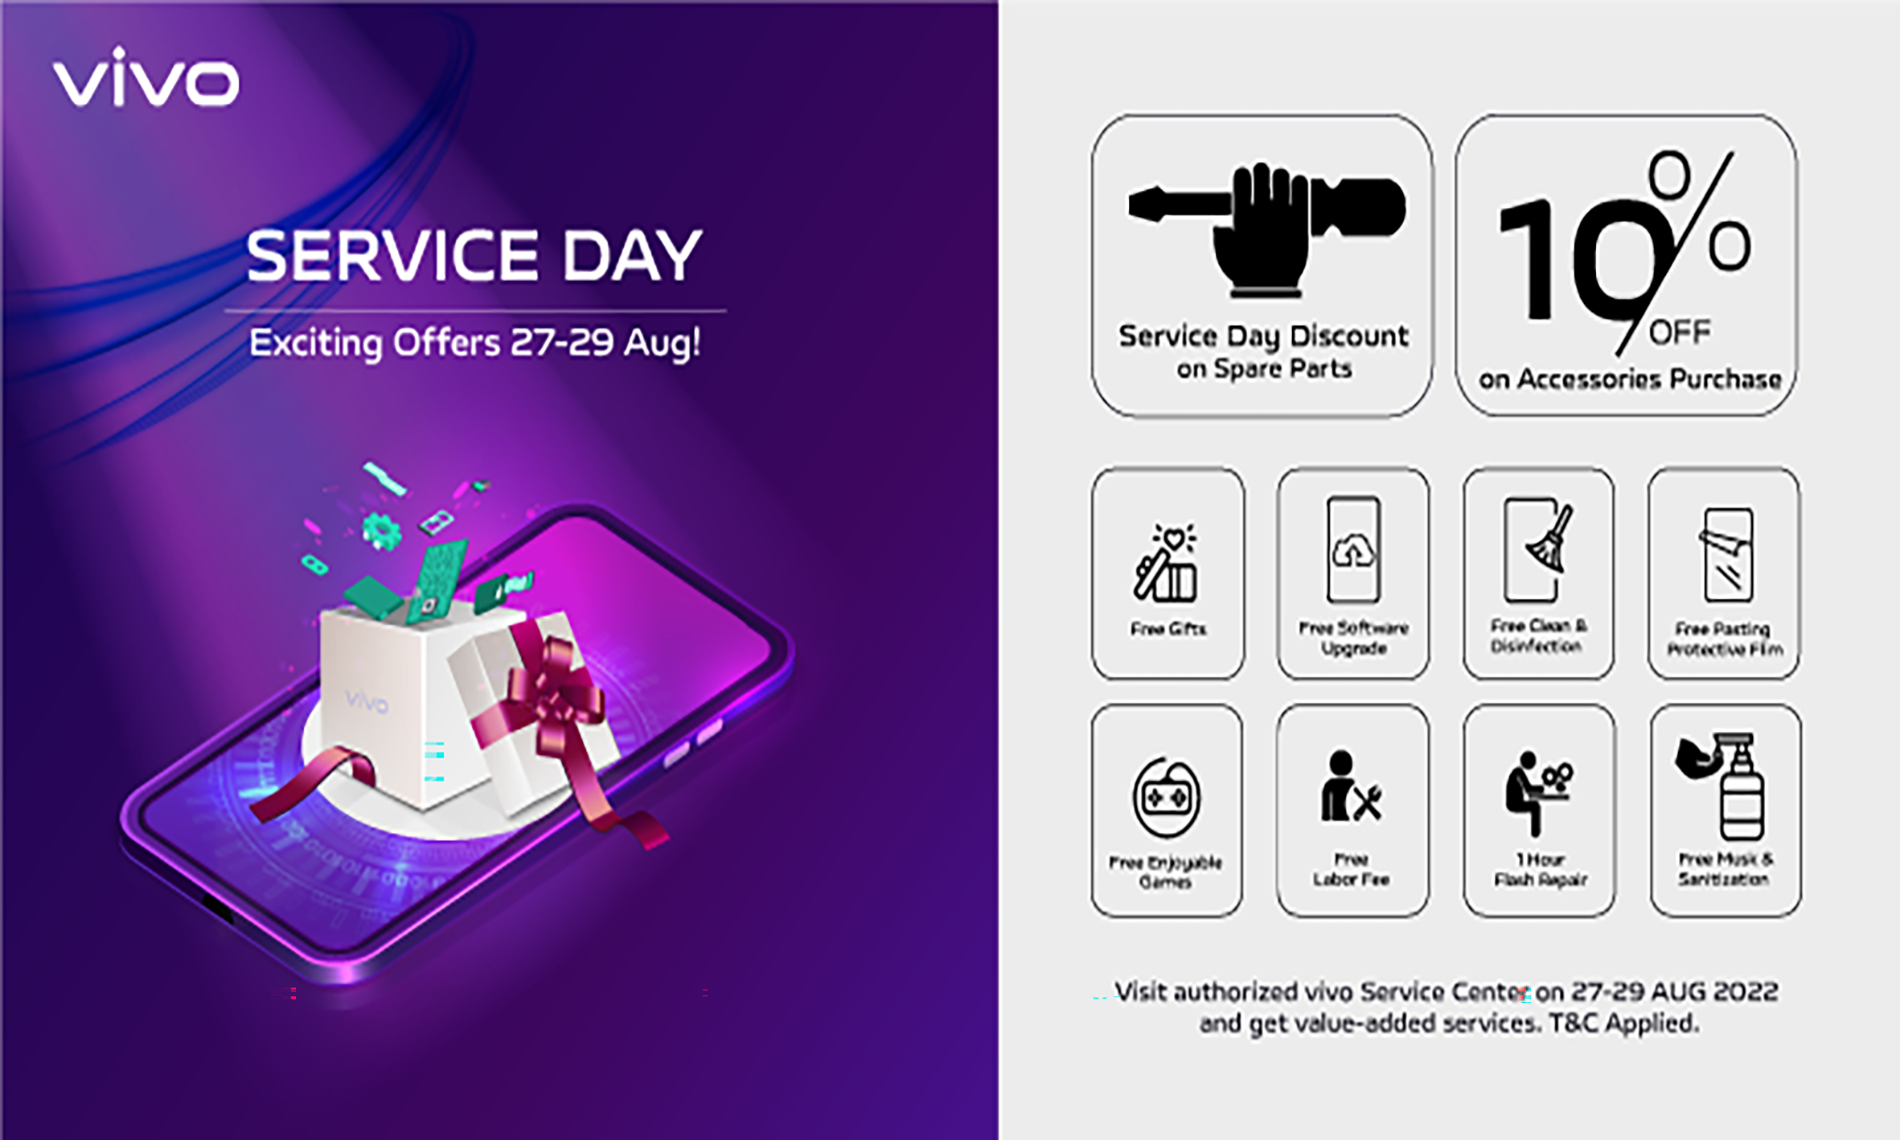 vivo service day Offers Exciting Gifts!